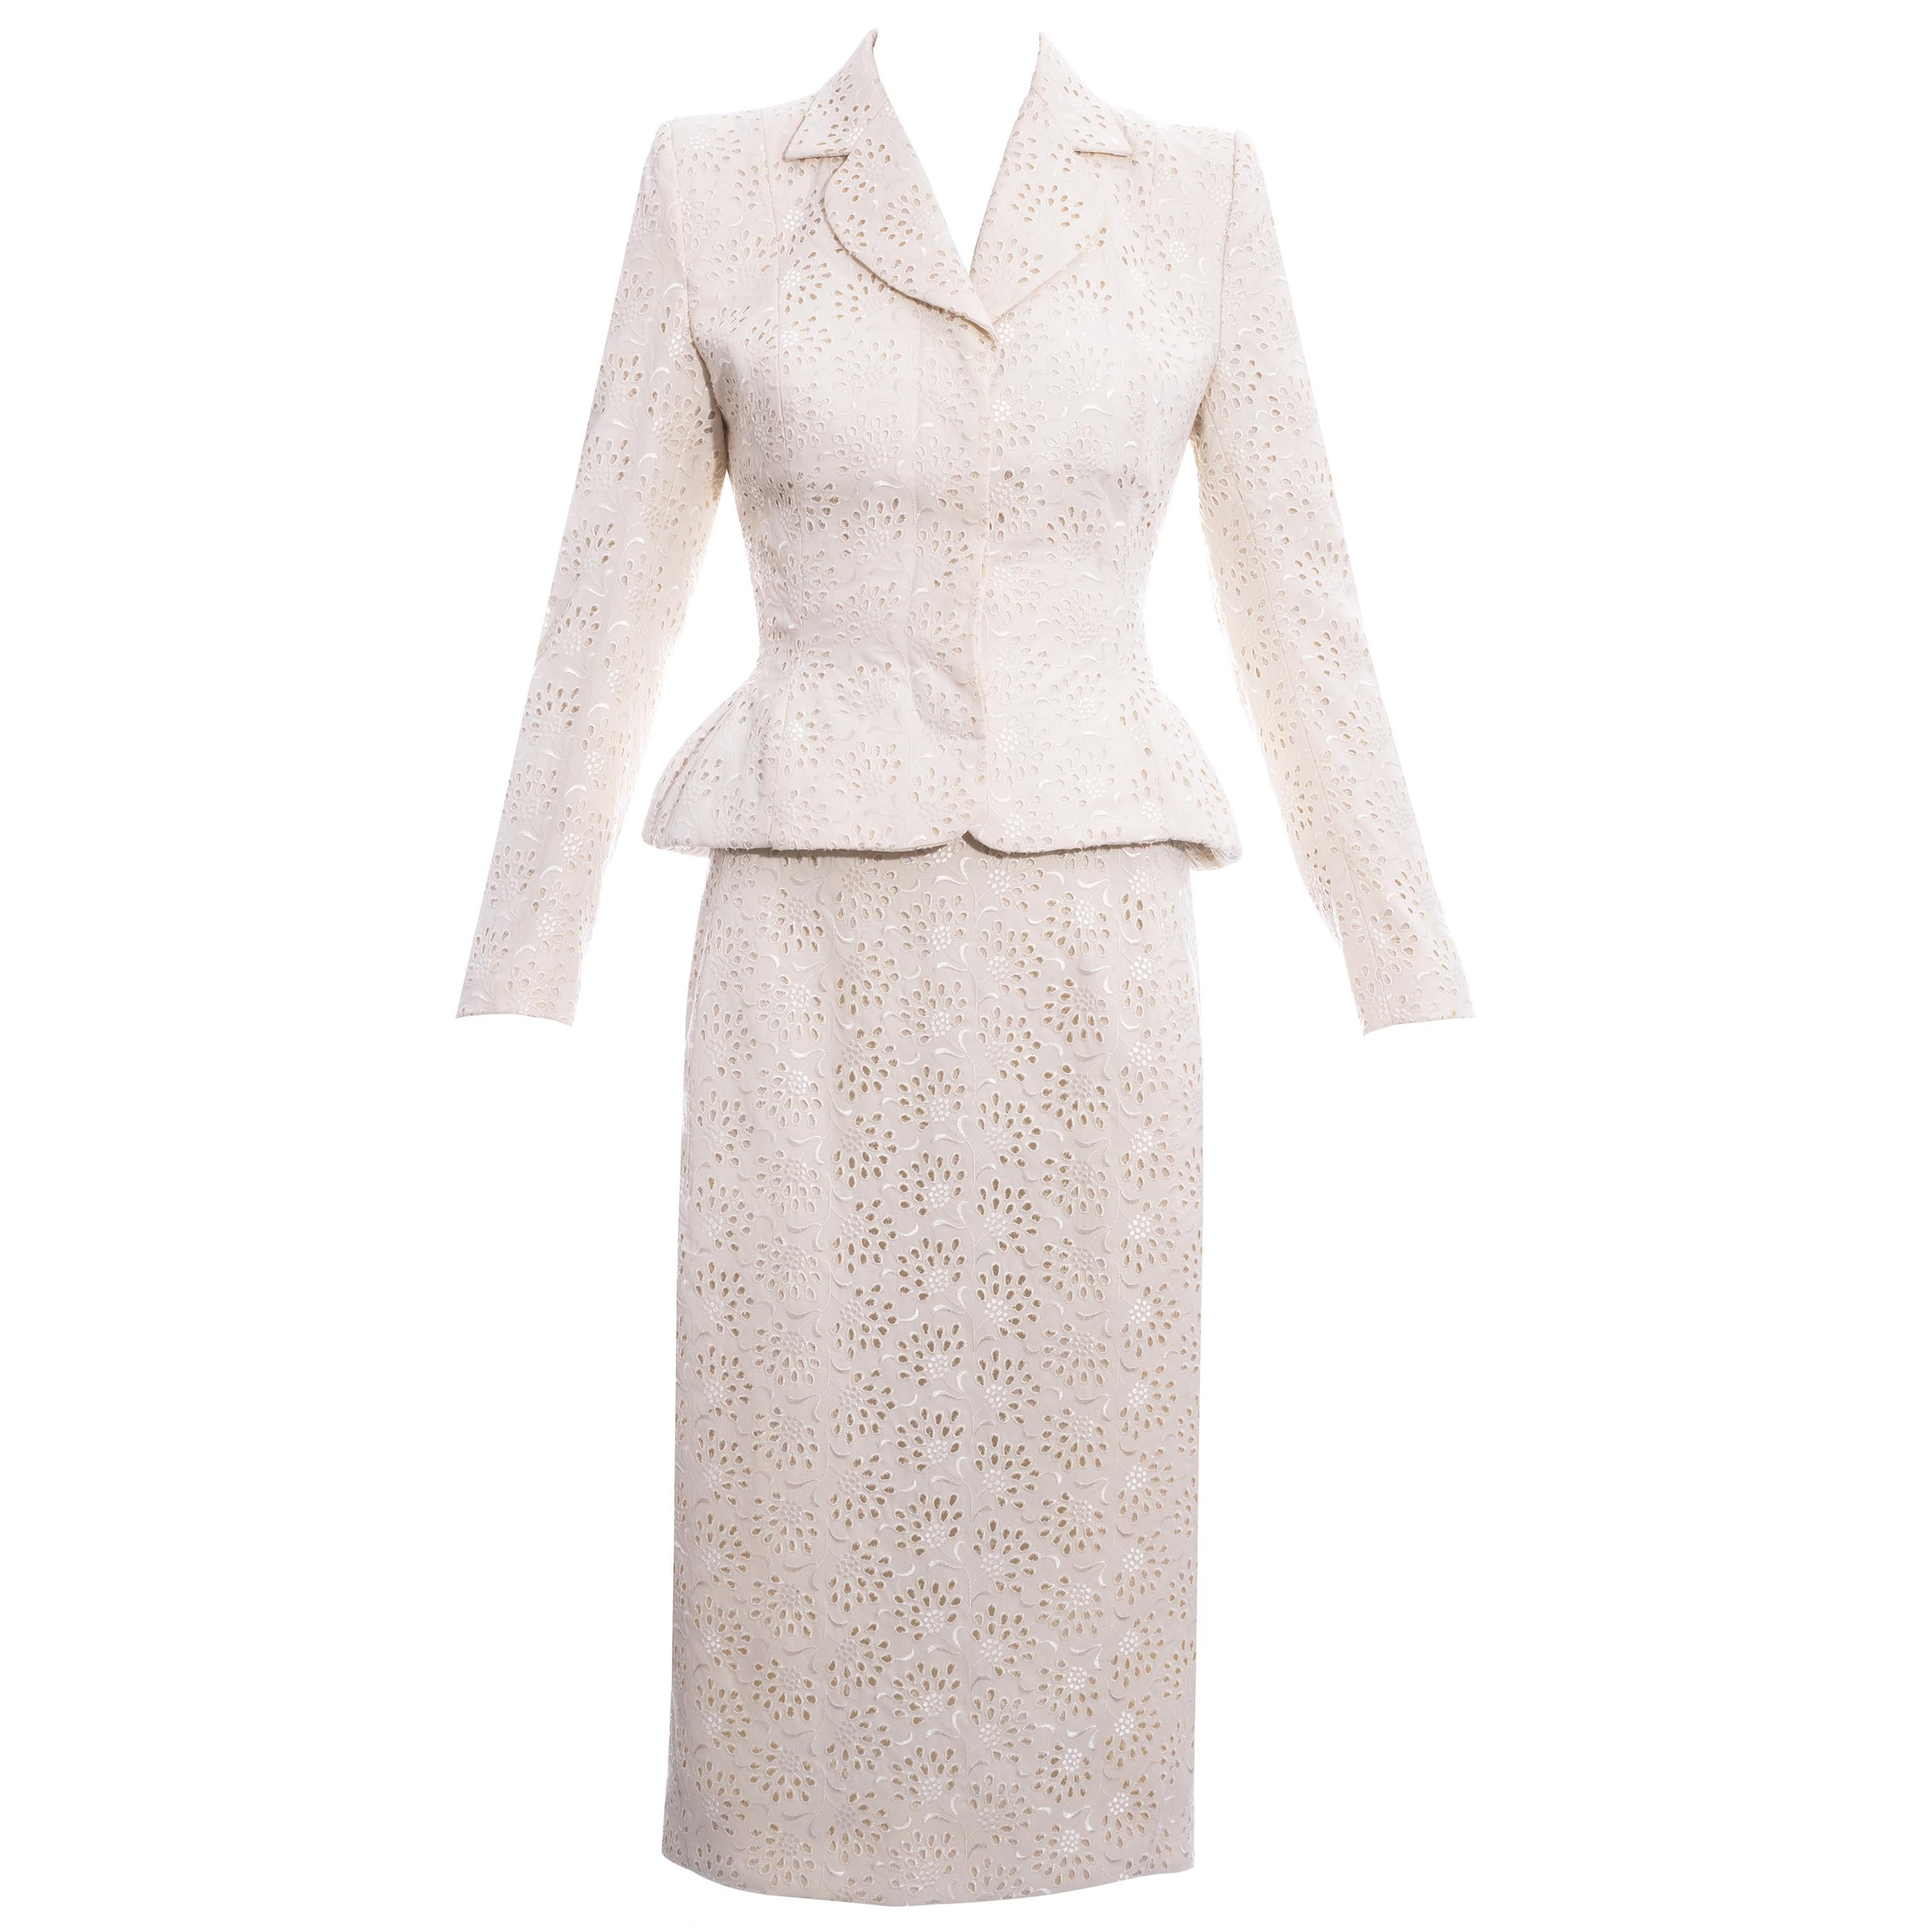 John Galliano white broderie anglaise cotton skirt suit, ss 1996